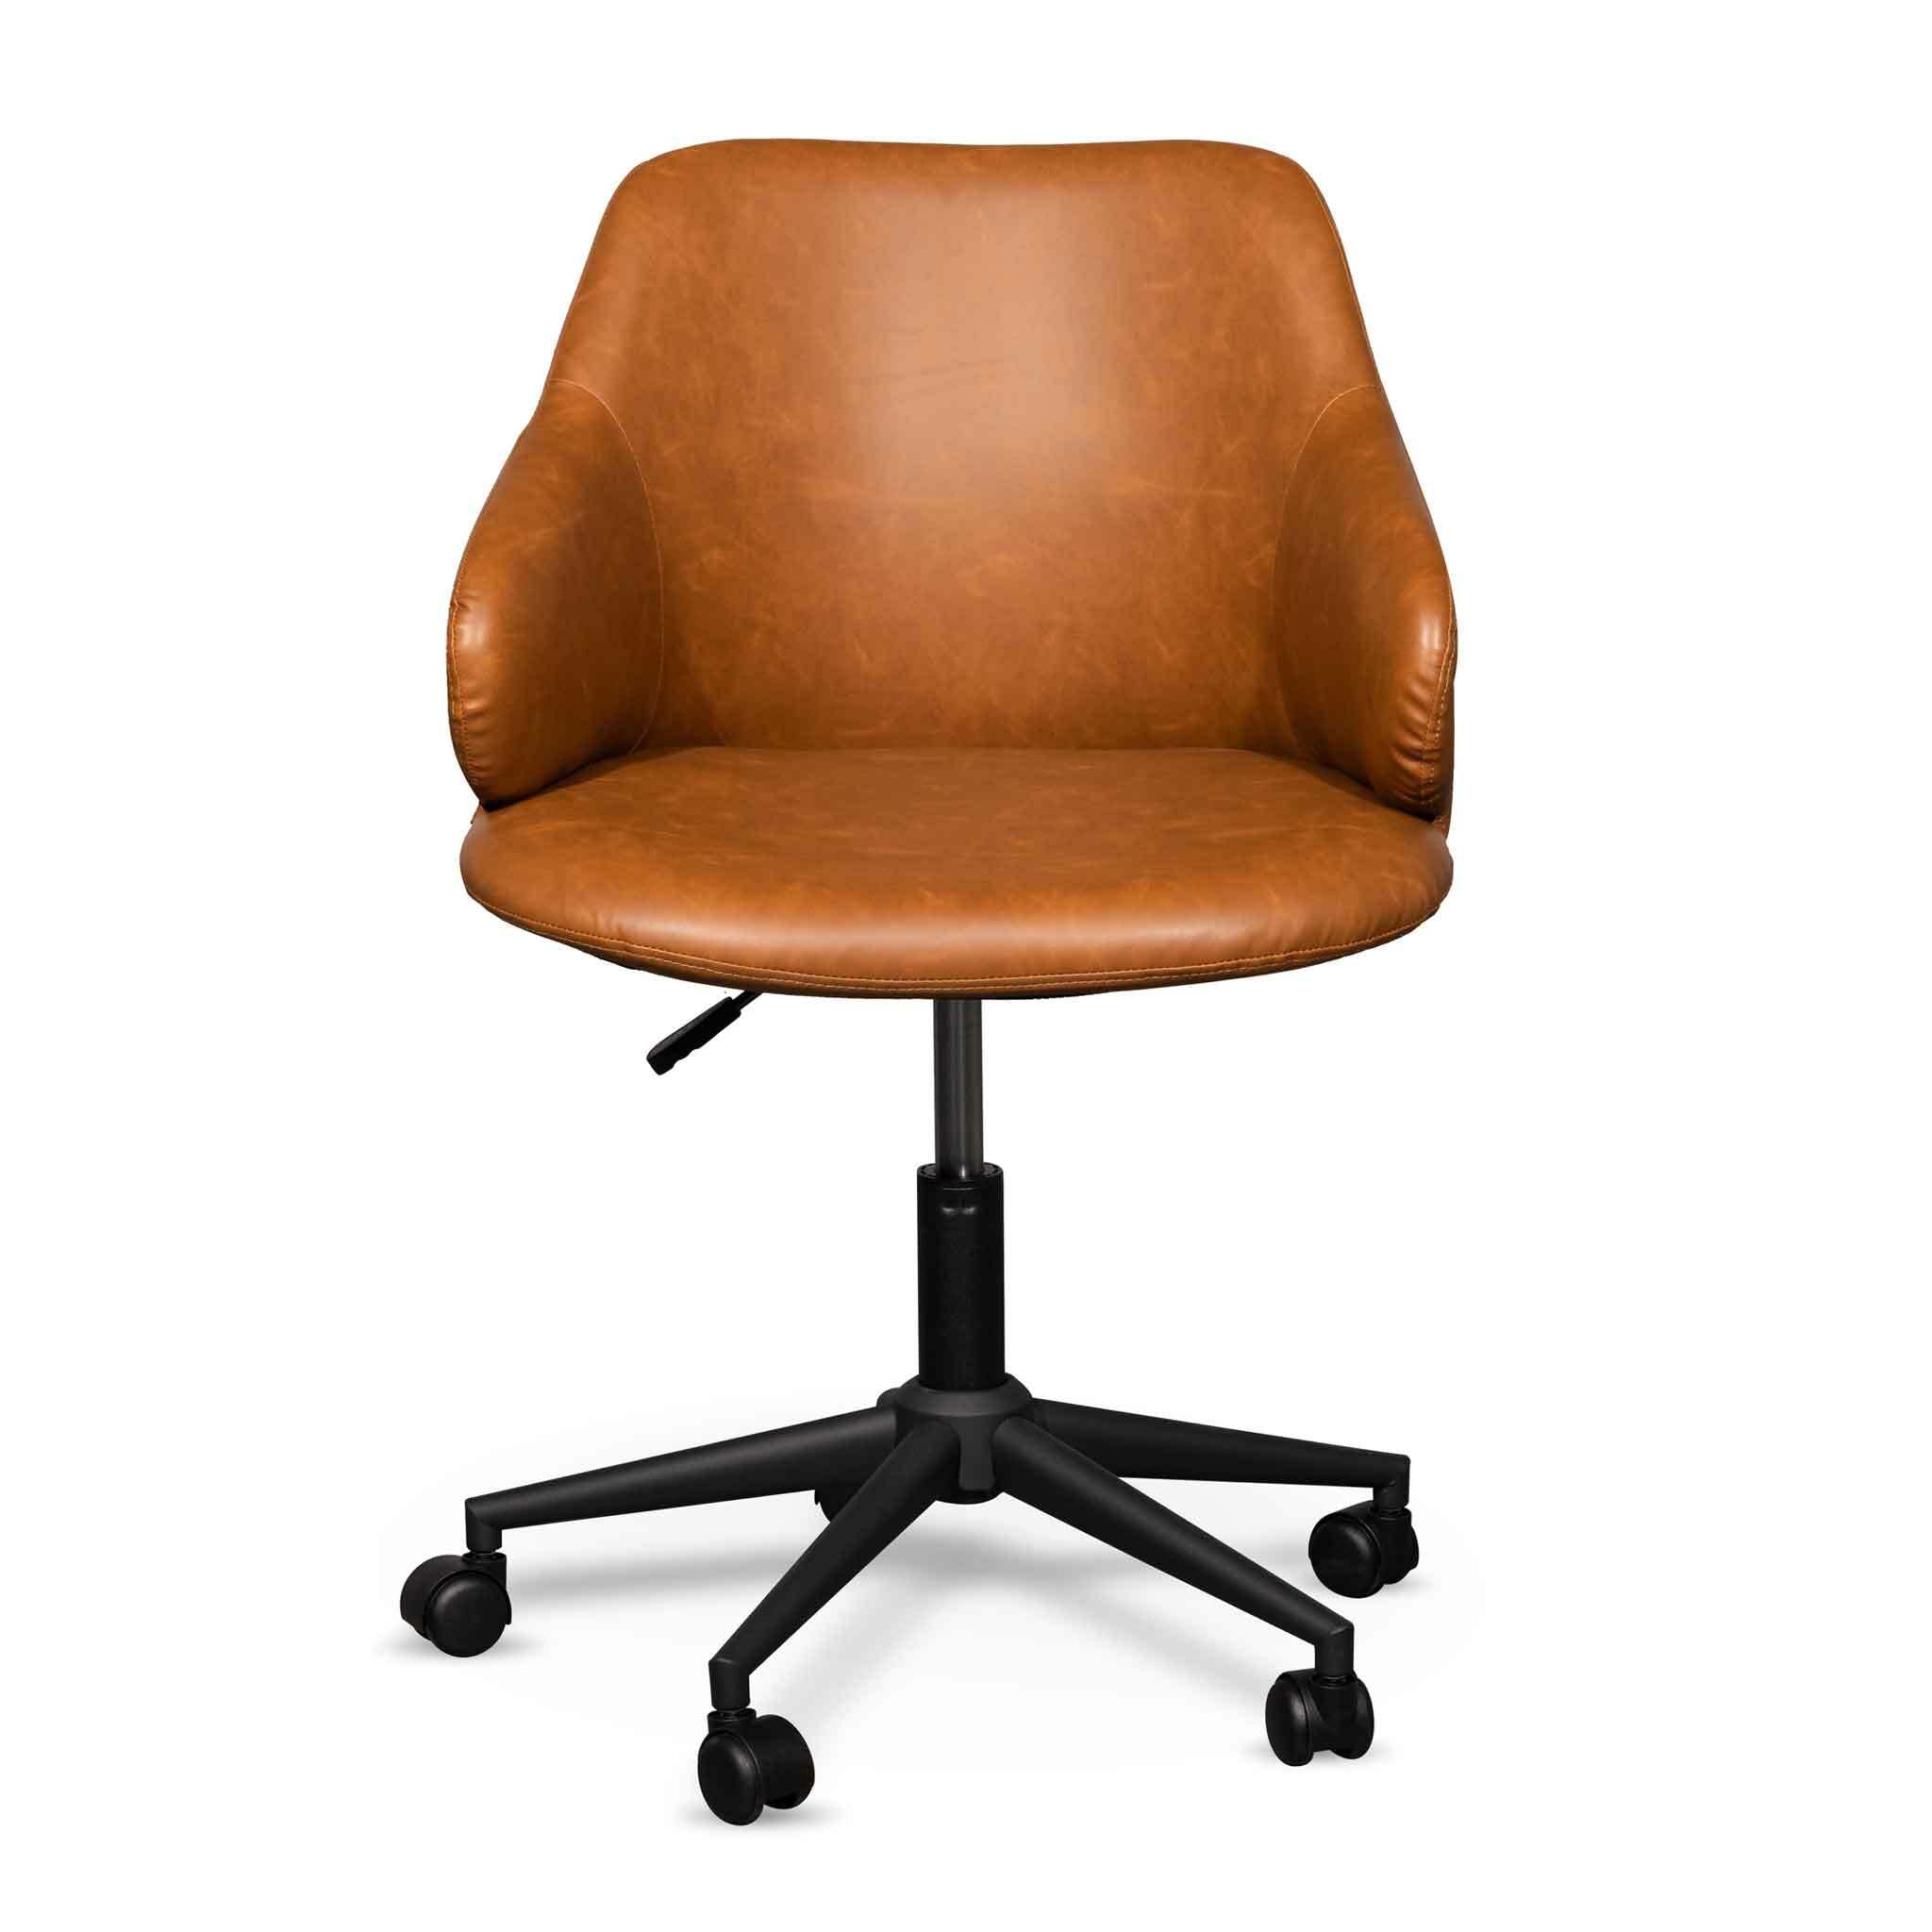 Hester Office Chair - Vintage Tan with Black Base